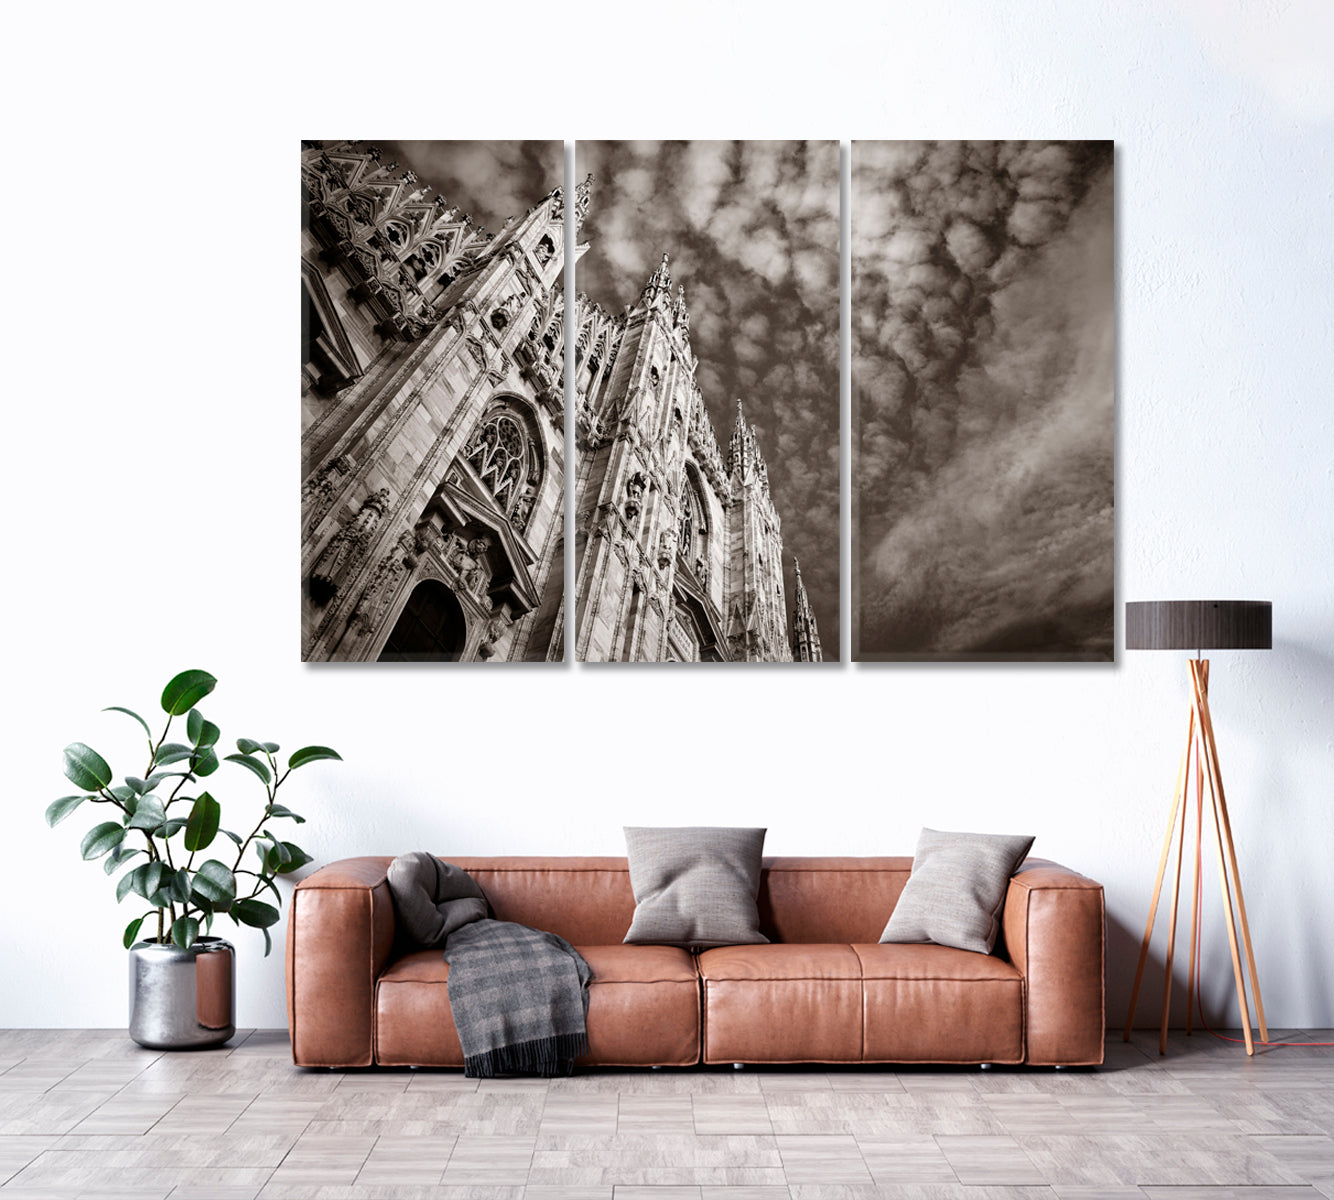 Gothic Duomo Cathedral Milan Italy Canvas Print ArtLexy 3 Panels 36"x24" inches 